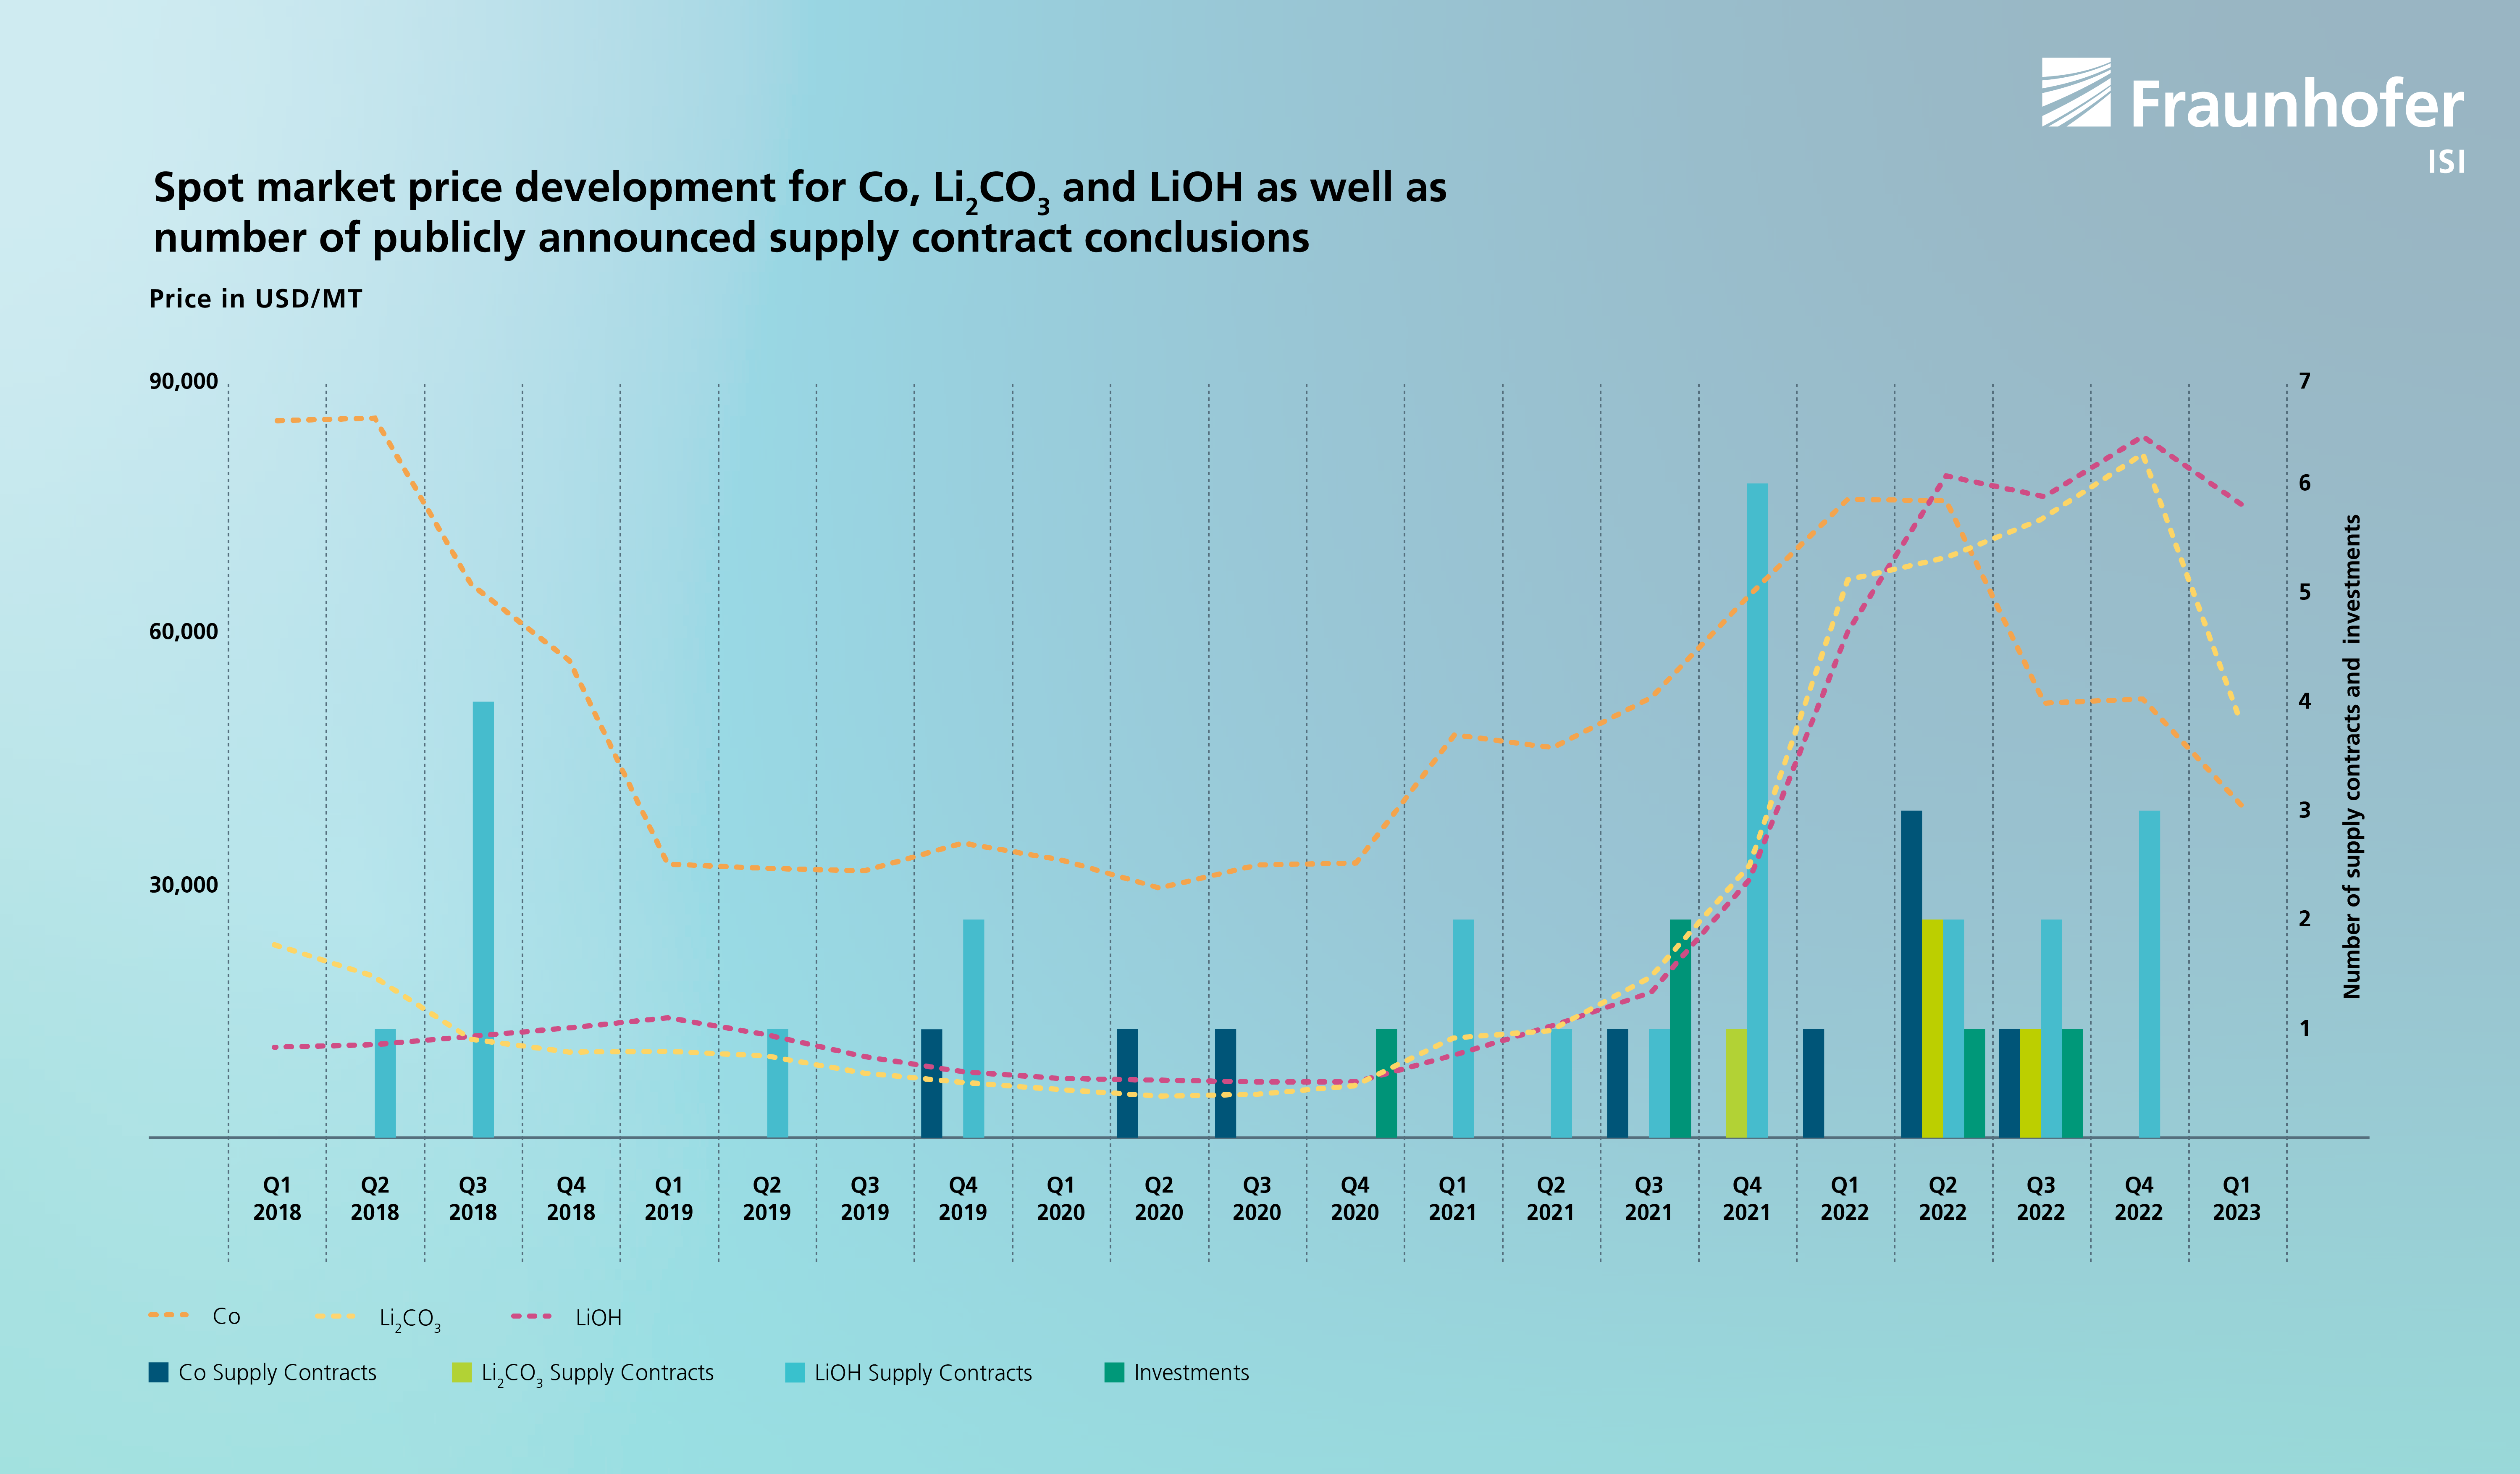 Spot market price development for Co, Li2CO3 and LiOH as well as number of publicly announced supply contract conclusions.